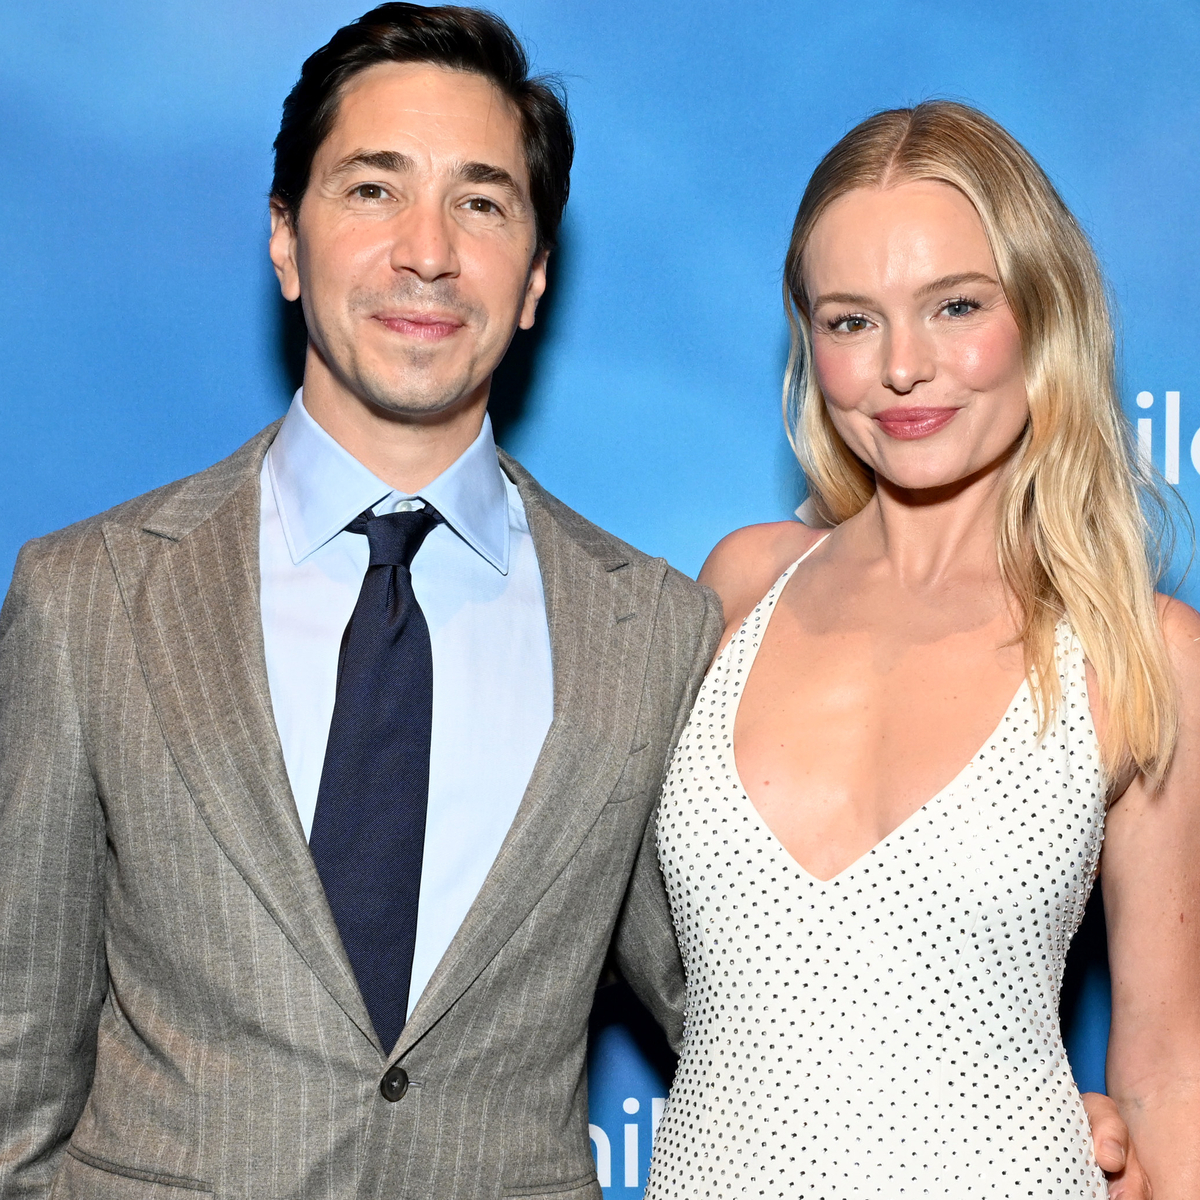 Justin Long Admits He “S–t the Bed” Next to Wife Kate Bosworth